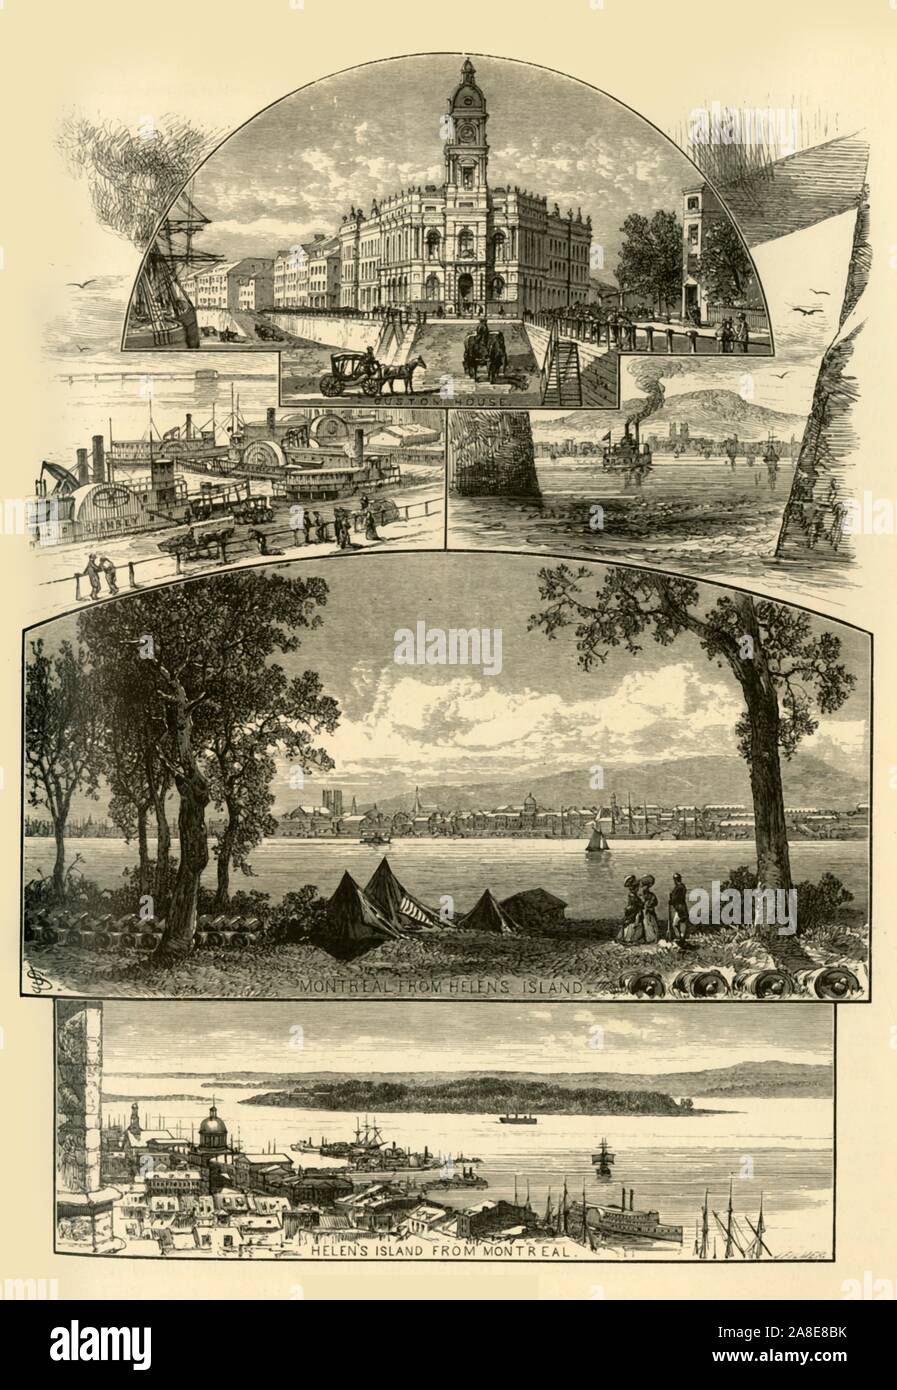 'Montreal', 1874. Views in the city of Montreal, Quebec, Canada: Custom House, paddle steamers on the Saint Lawrence River, Montreal from Helen's Island, and Helen's Island from Montreal. From &quot;Picturesque America; or, The Land We Live In, A Delineation by Pen and Pencil of the Mountains, Rivers, Lakes...with Illustrations on Steel and Wood by Eminent American Artists&quot; Vol. II, edited by William Cullen Bryant. [D. Appleton and Company, New York, 1874] Stock Photo